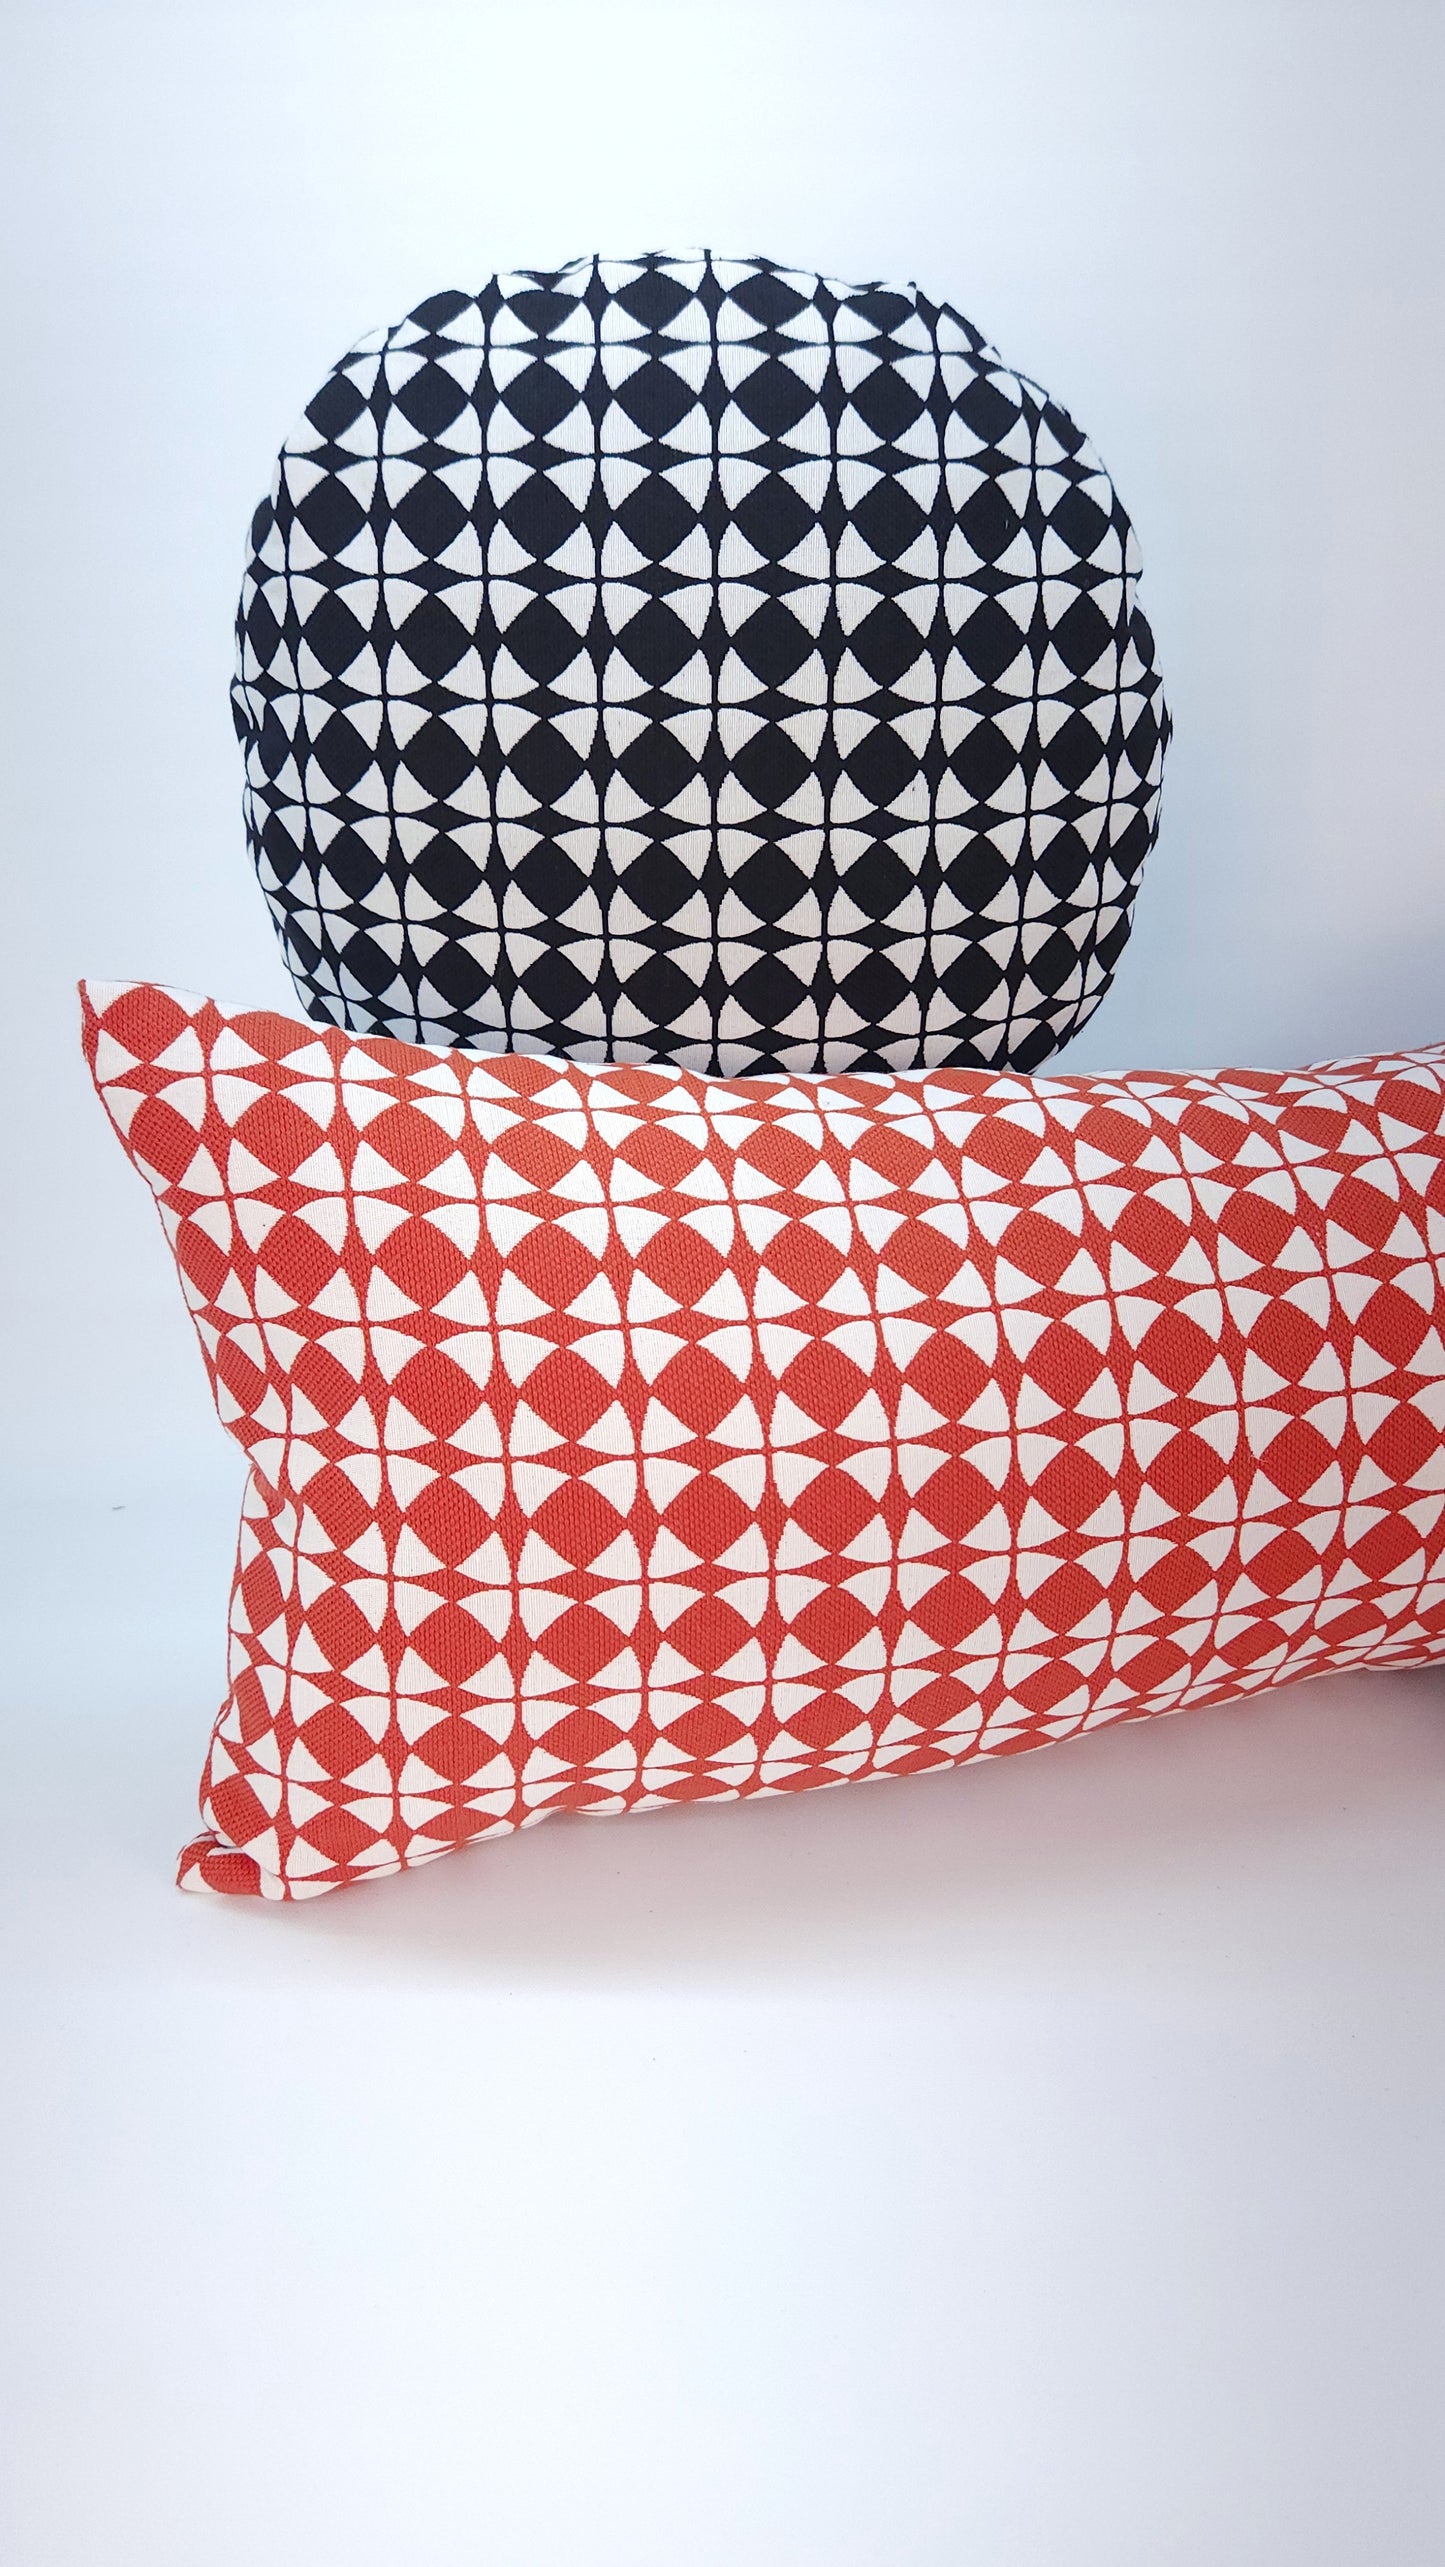 Explorer58 Rectangular Lumbar Pillow Cover, Thruster Red, Various Sizes, with or without Inserts, Handmade by Houston and Scott